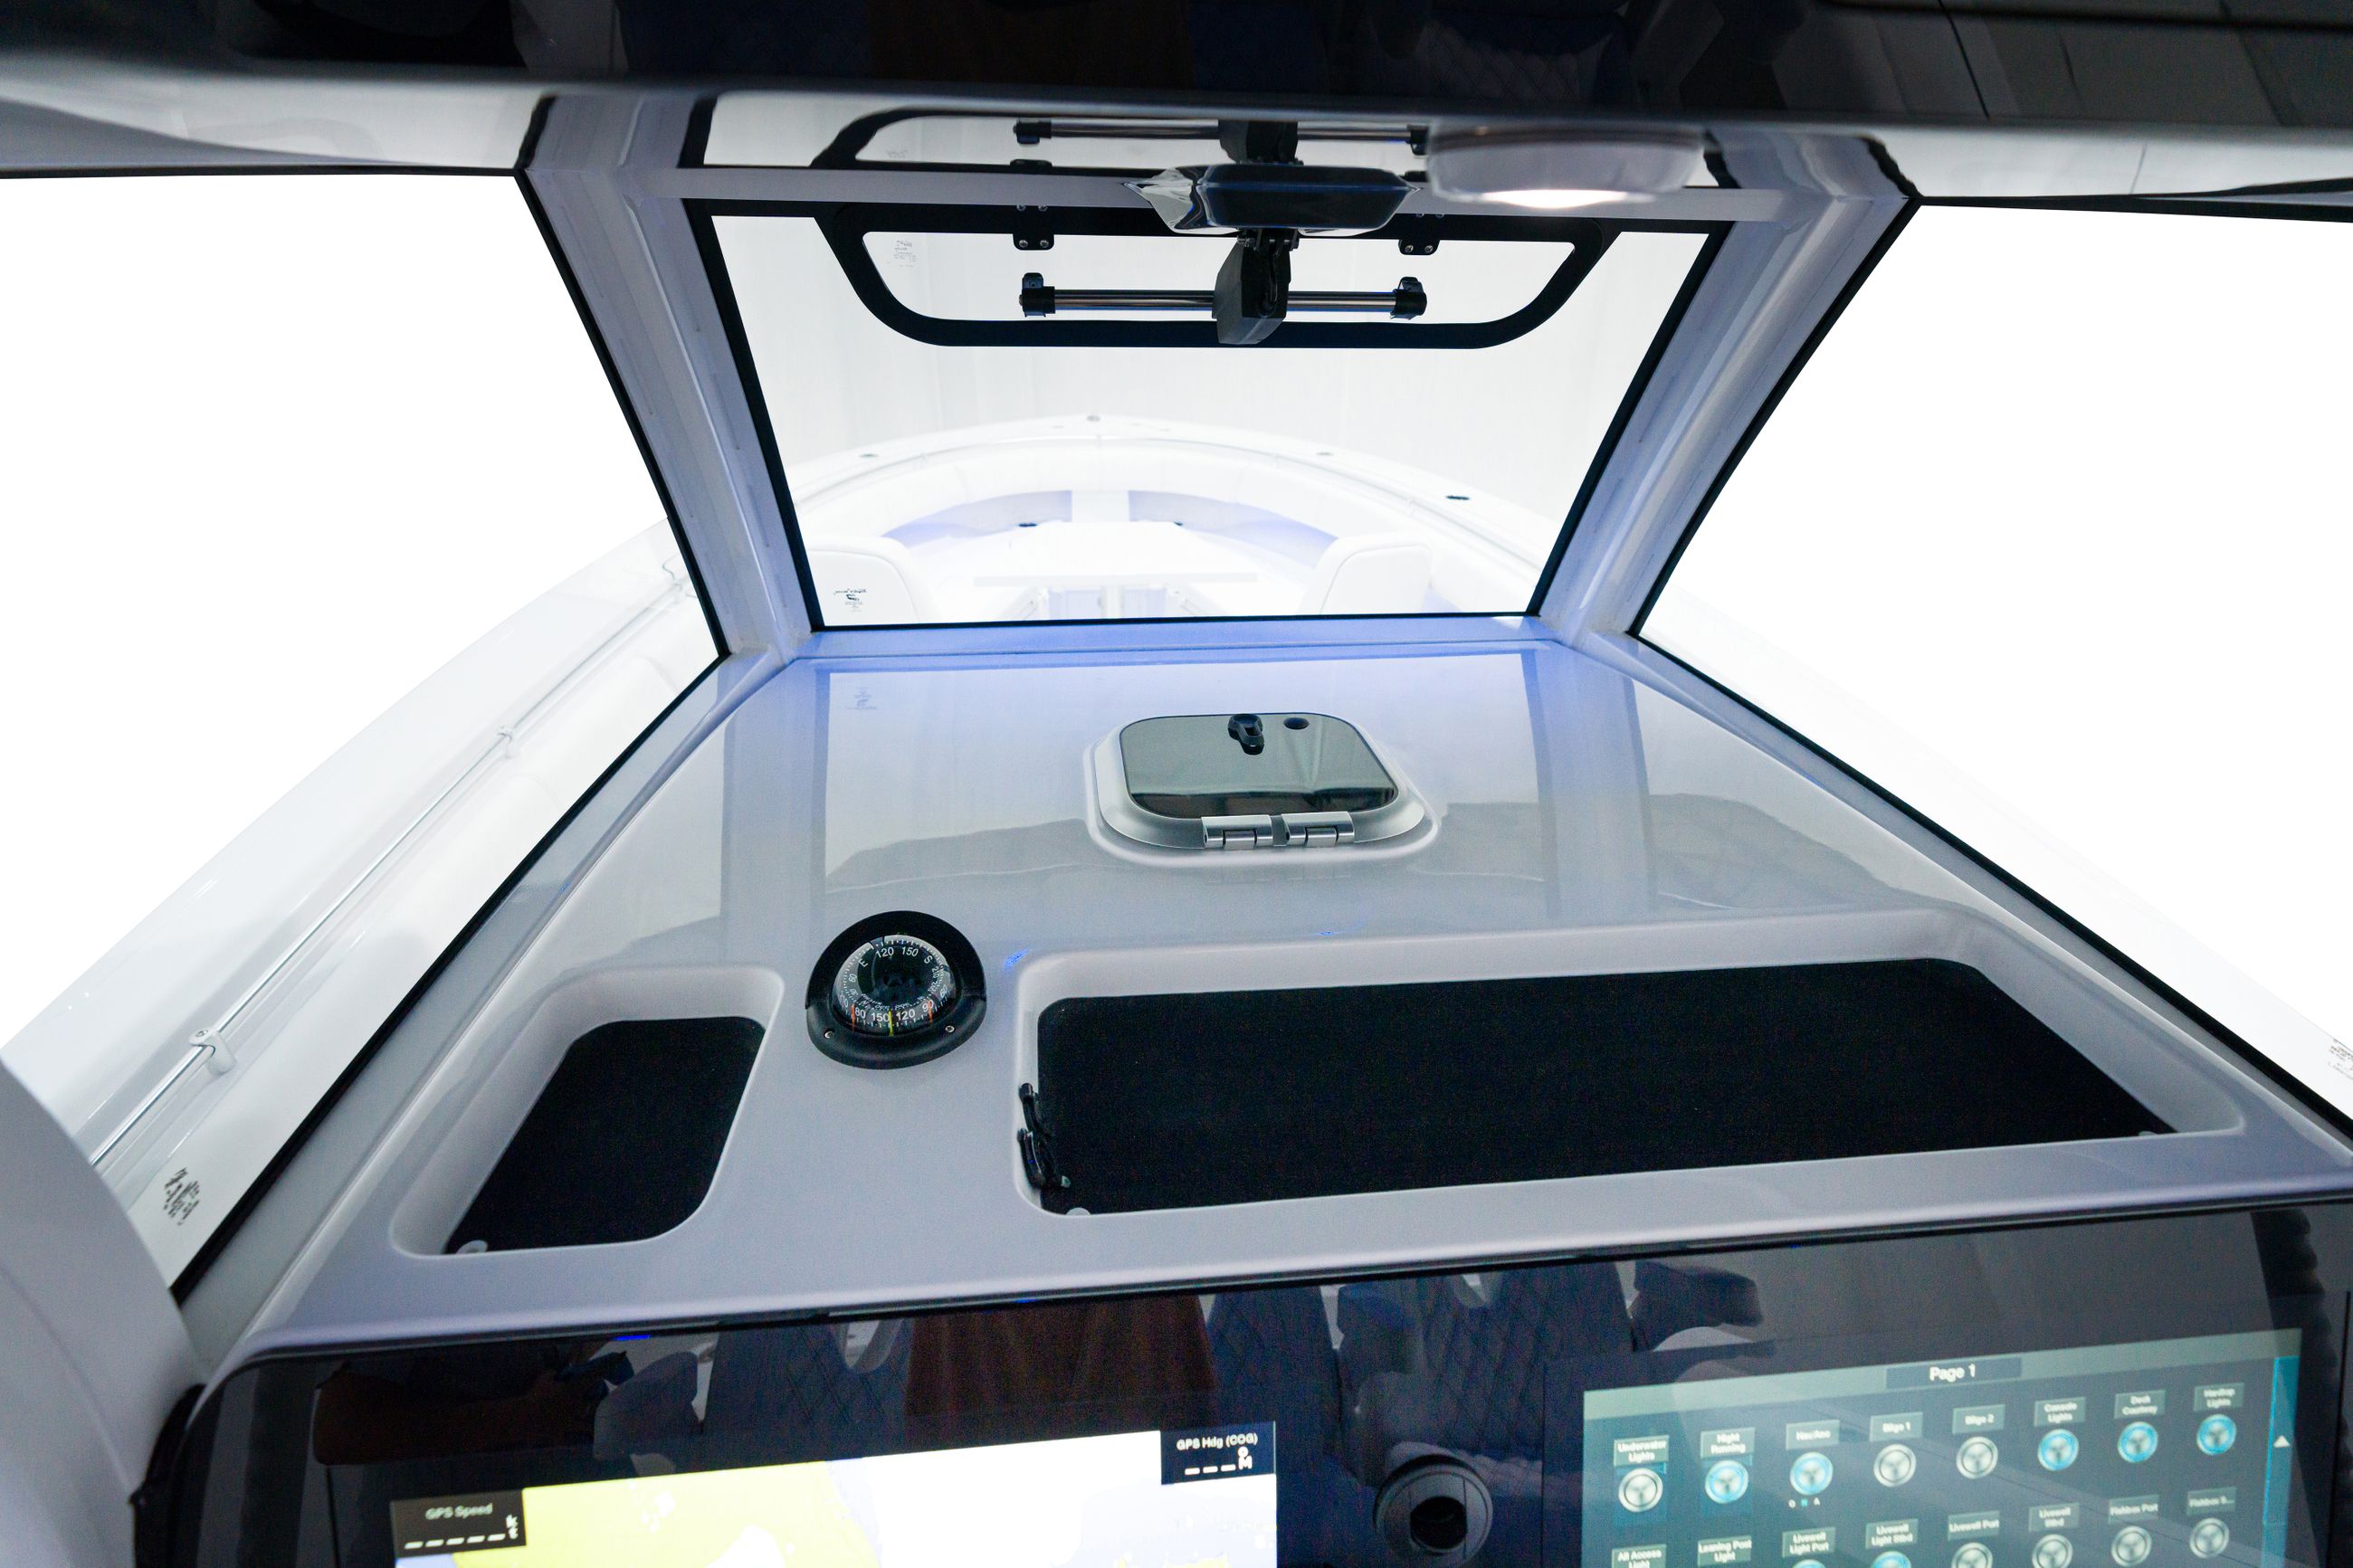 Detail image of Integrated Tempered Glass Windshield w/ Actuated Vent